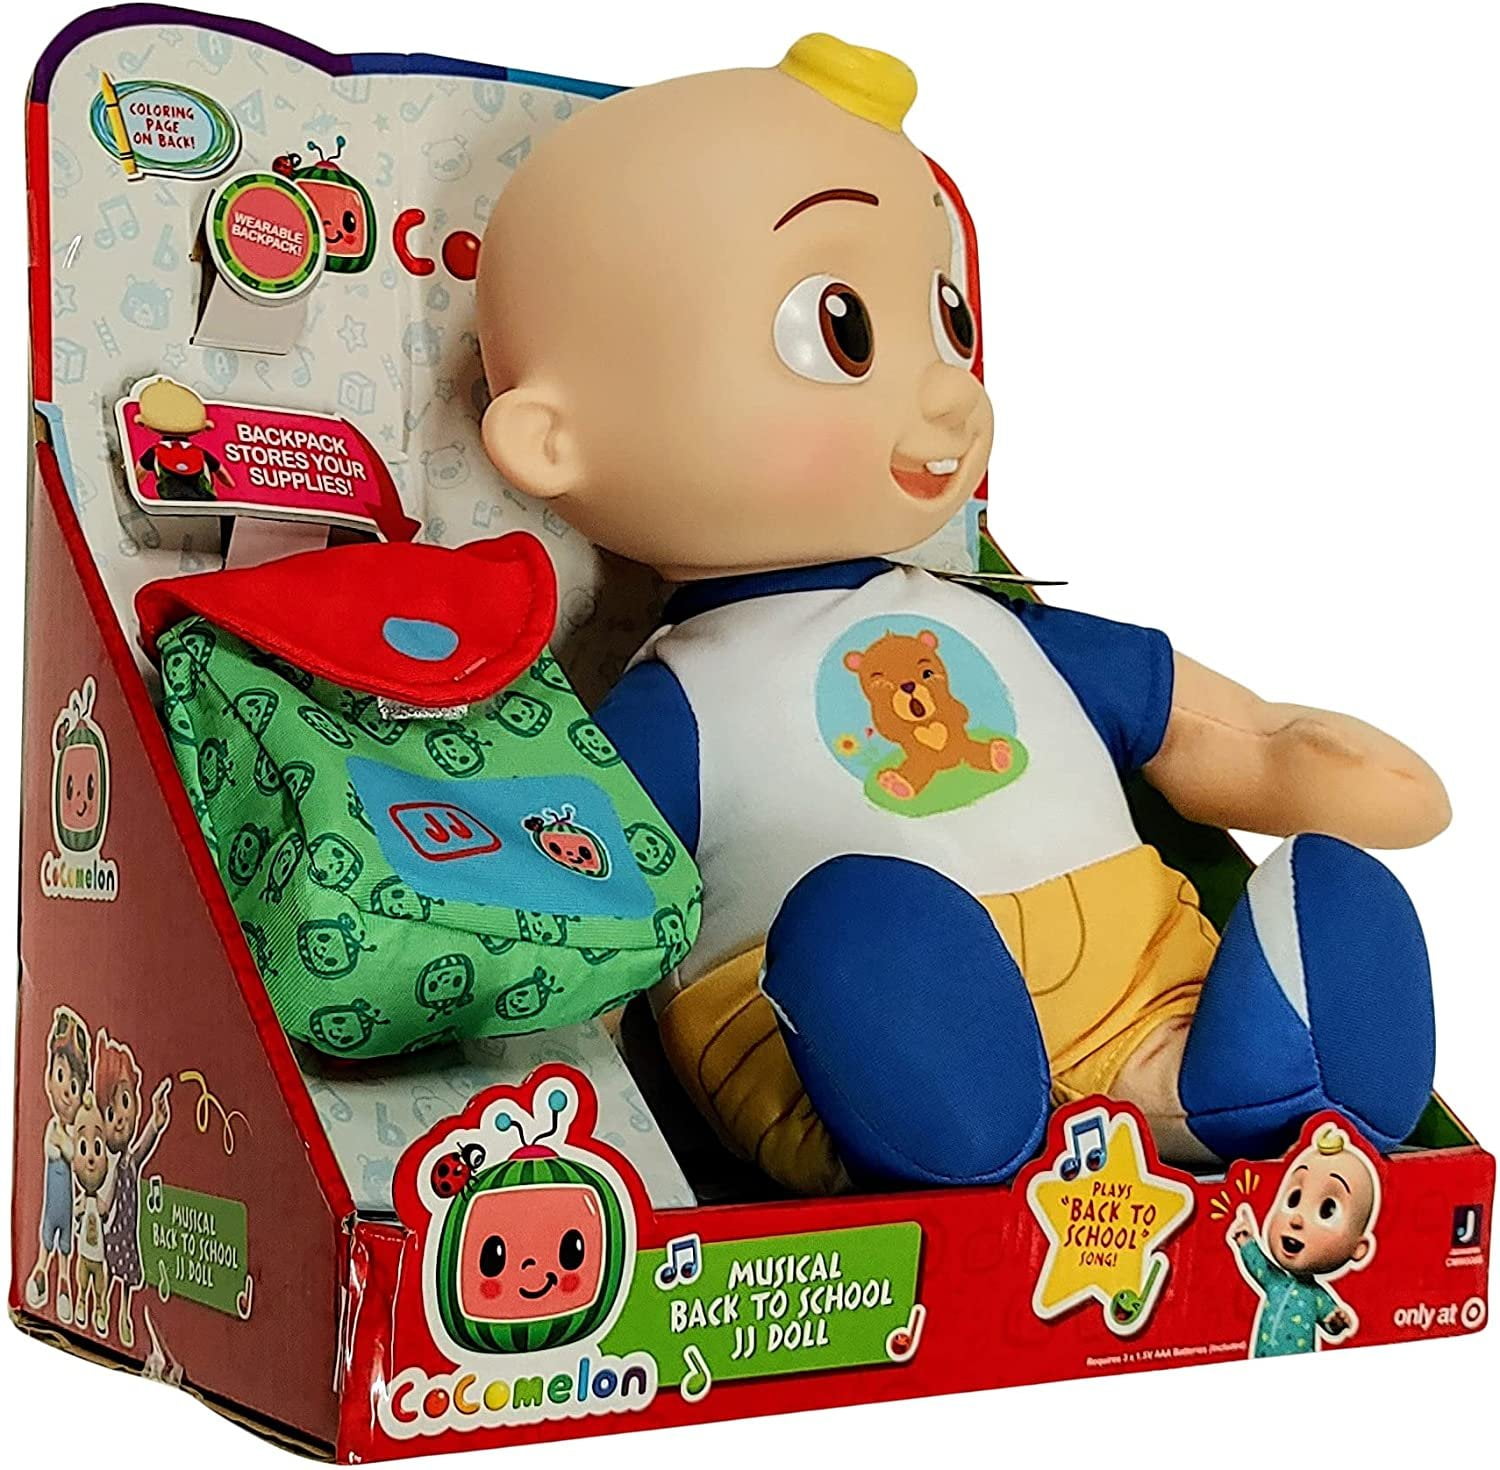 Details about   HOT Cocomelon JJ's Family Educational Plush Stuffed Doll Toys Kids FAST SHIPPING